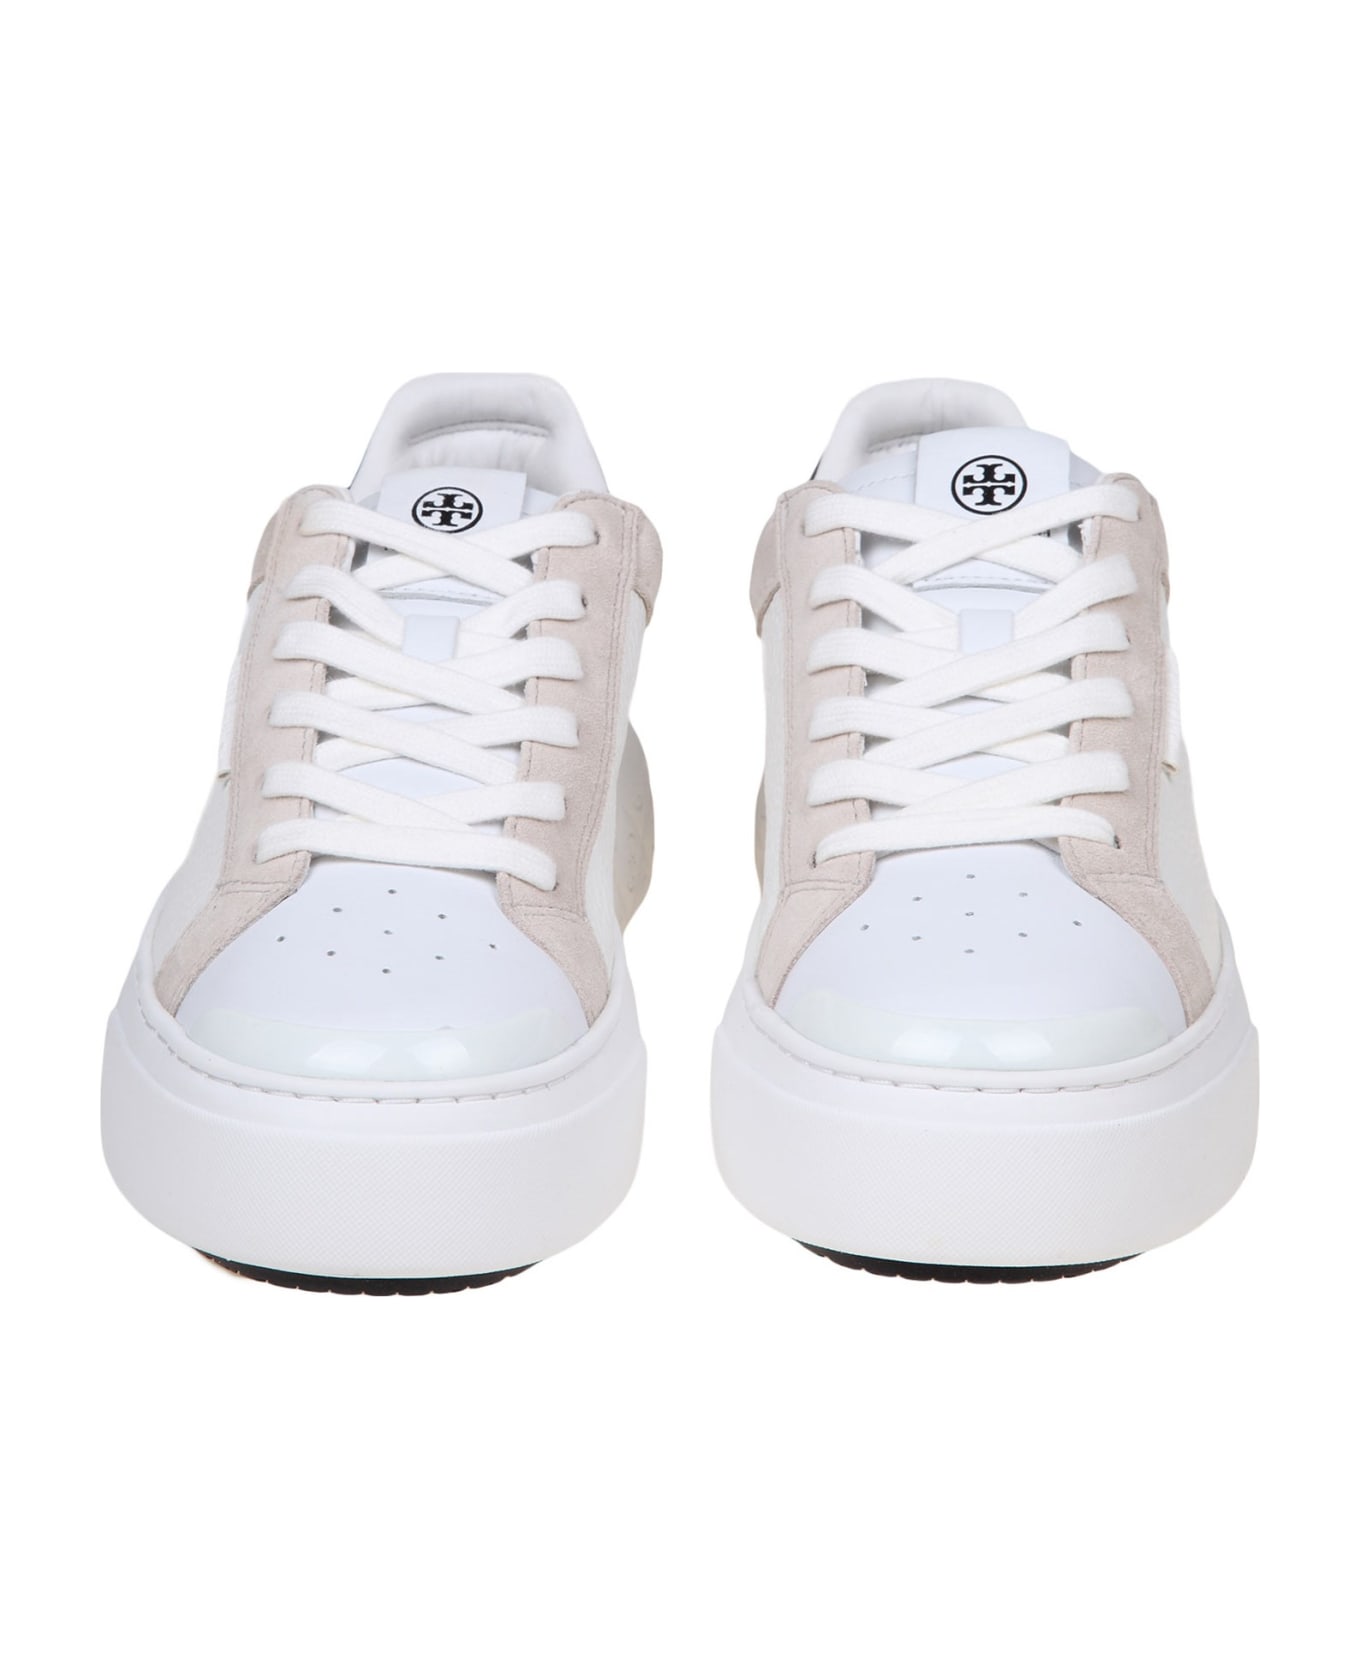 Tory Burch Ladybug Sneakers In White Suede And Leather - White/Black